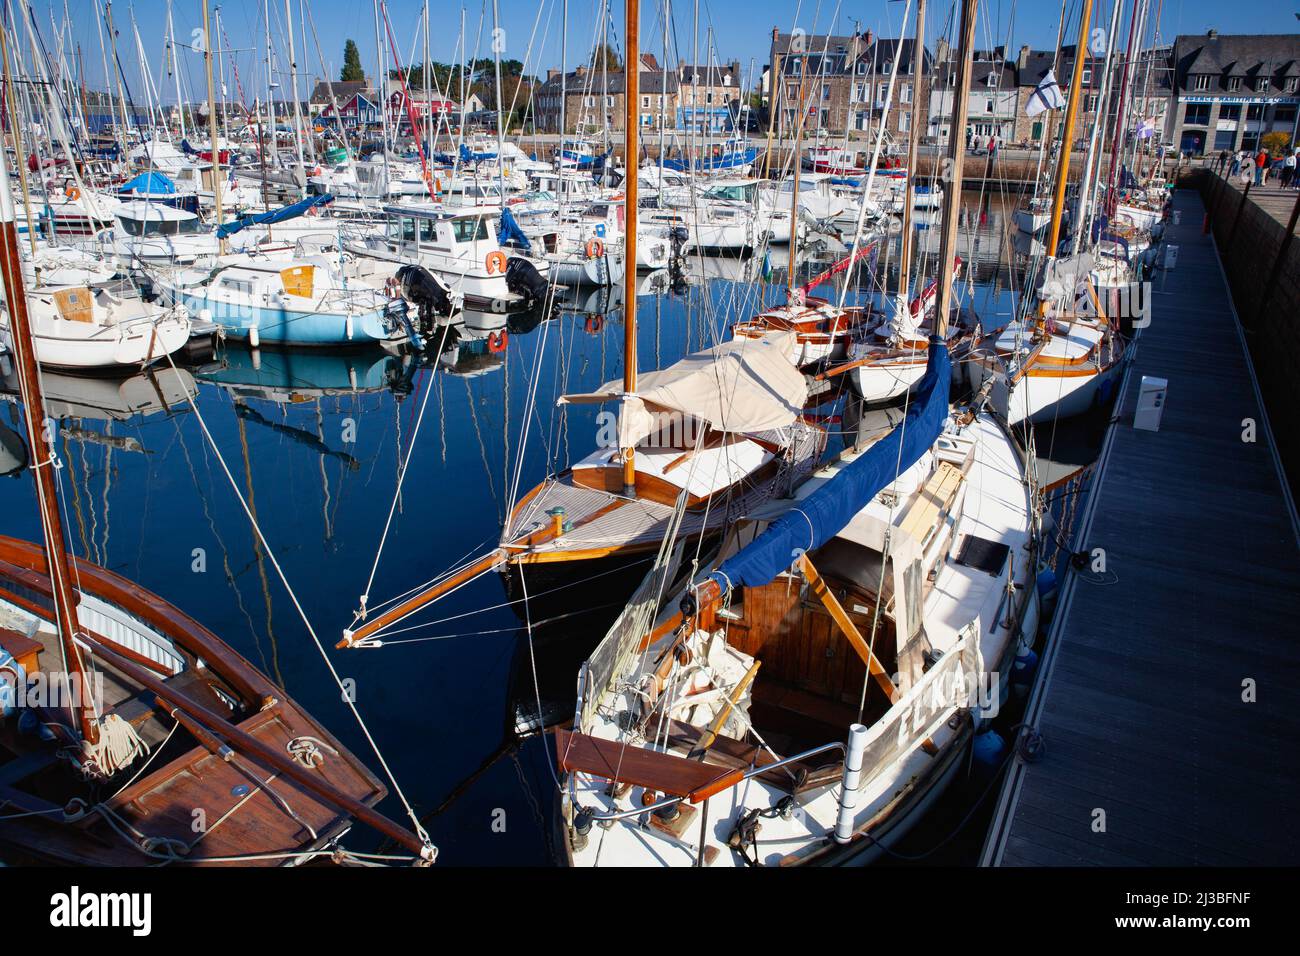 Paimpol,France - 17 October, 2021: Yacht harbour in Paimpol, France.Paimpol is a commune in the Cotes-d Armor department in Brittany in northwest Fran Stock Photo